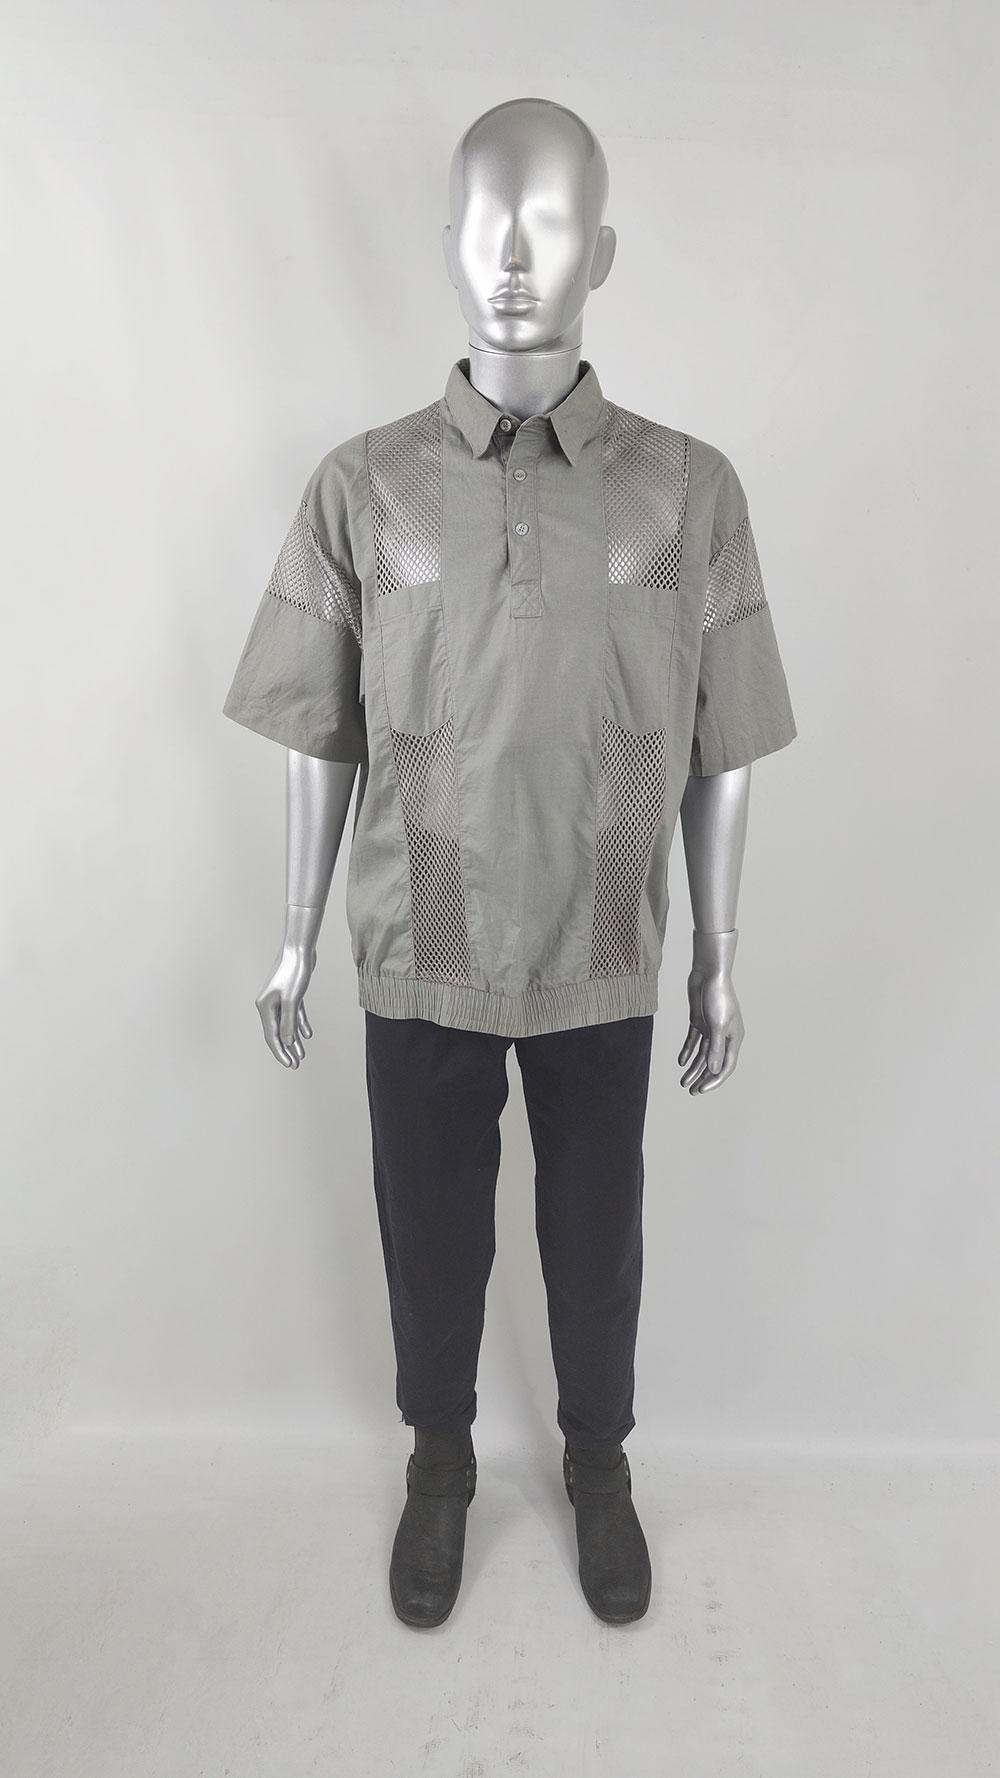 A stylish vintage men's shirt from the late 1980s / early 1990s. Made of grey cotton, it features see-through mesh panels, an oversized blouson fit, and short sleeves. Perfect for clubbing or a party.

Size: Marked D 52 / 54 - GB 42 / 44 which